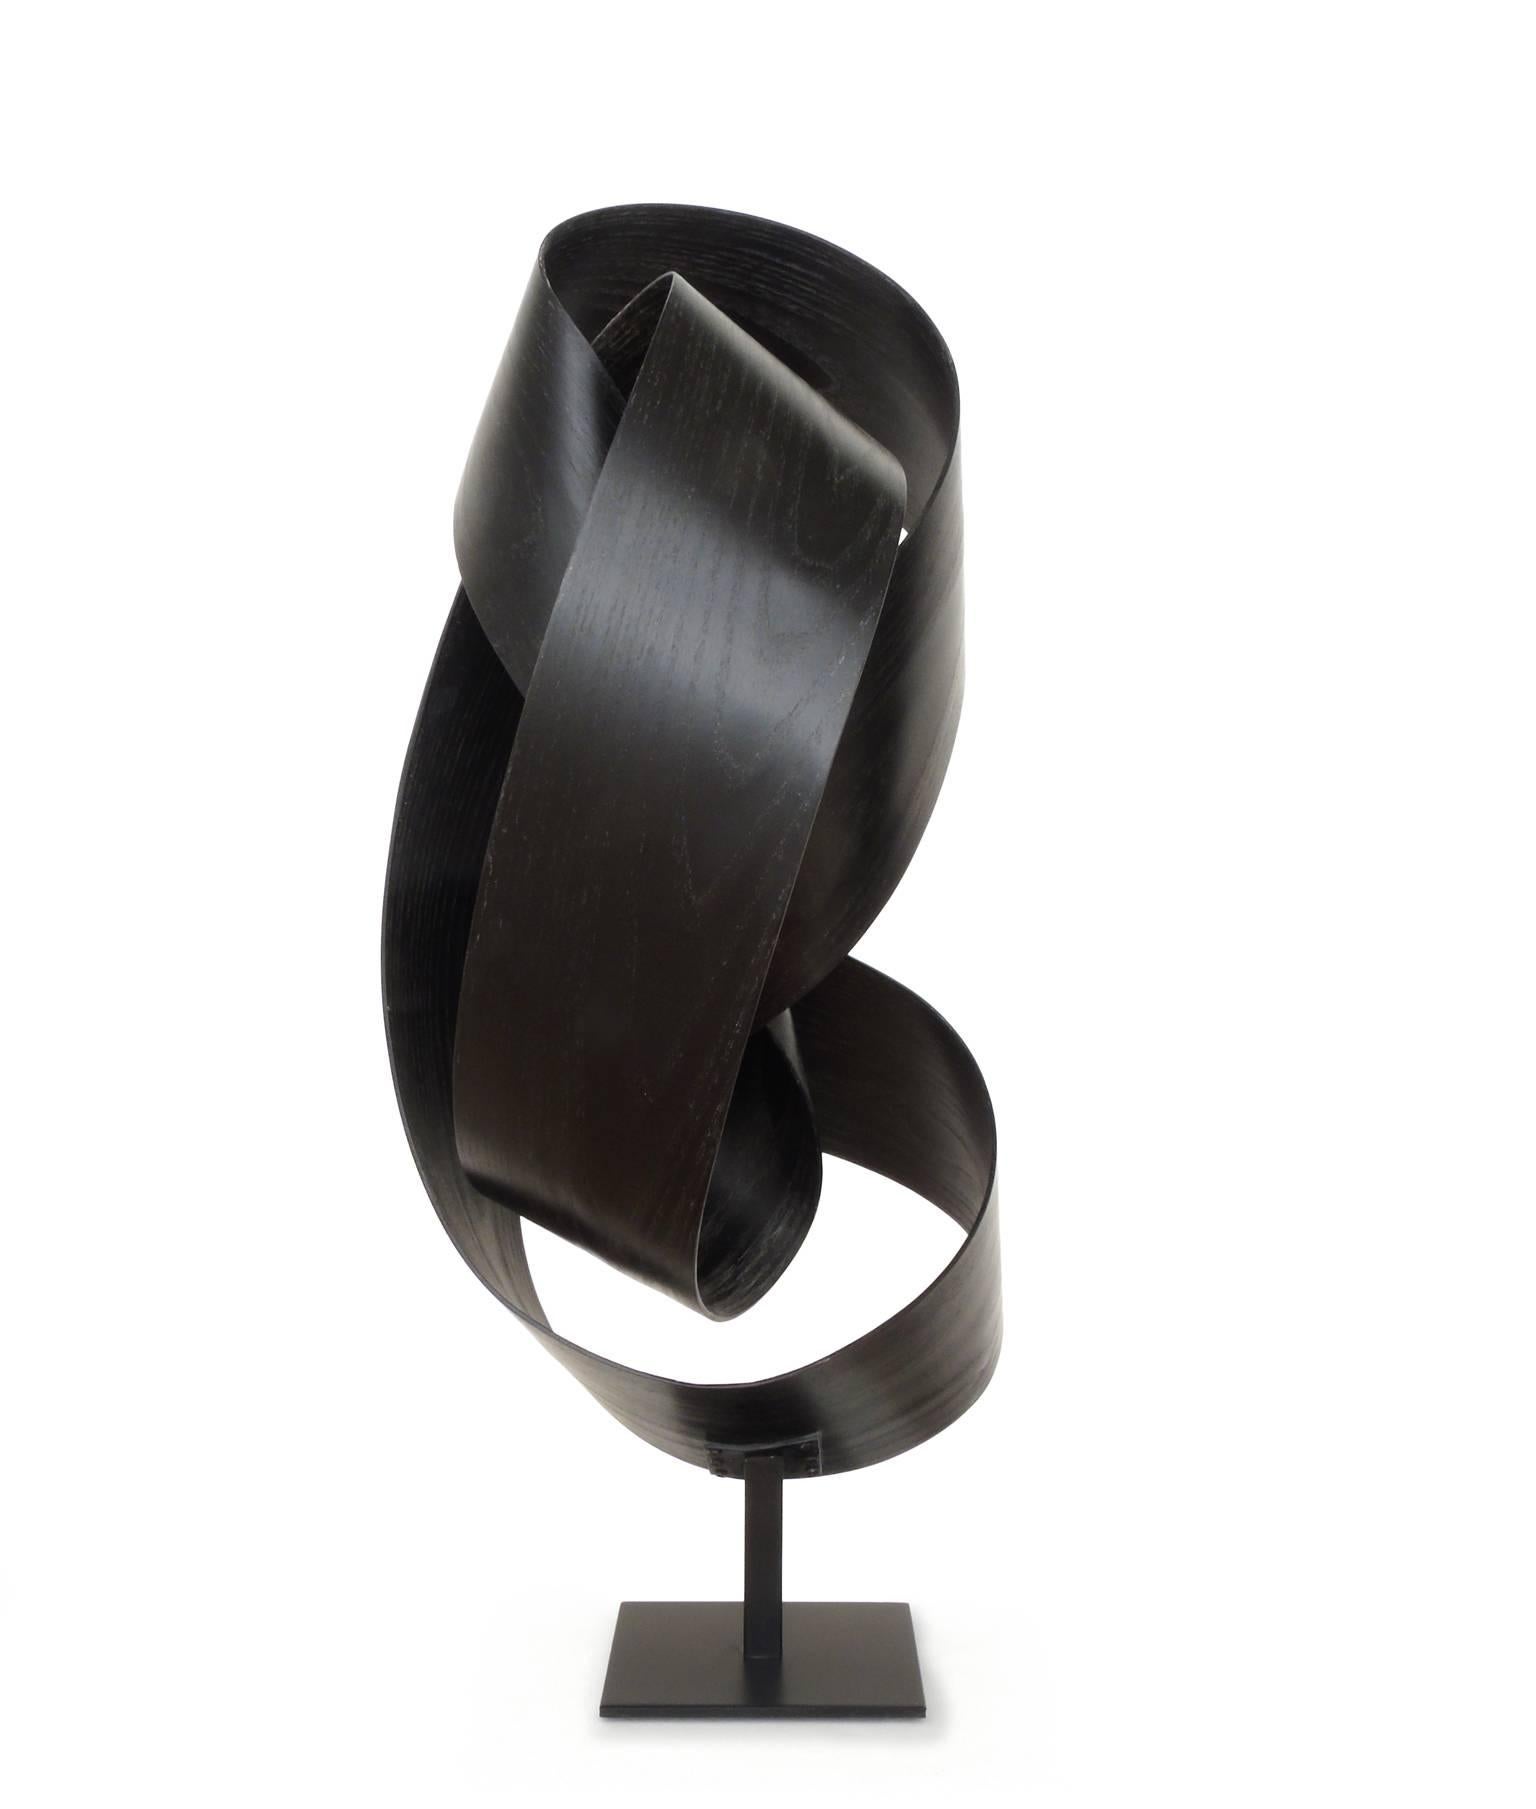 Atmosphere #248 (black bentwood sculpture) - Contemporary Sculpture by Jeremy Holmes